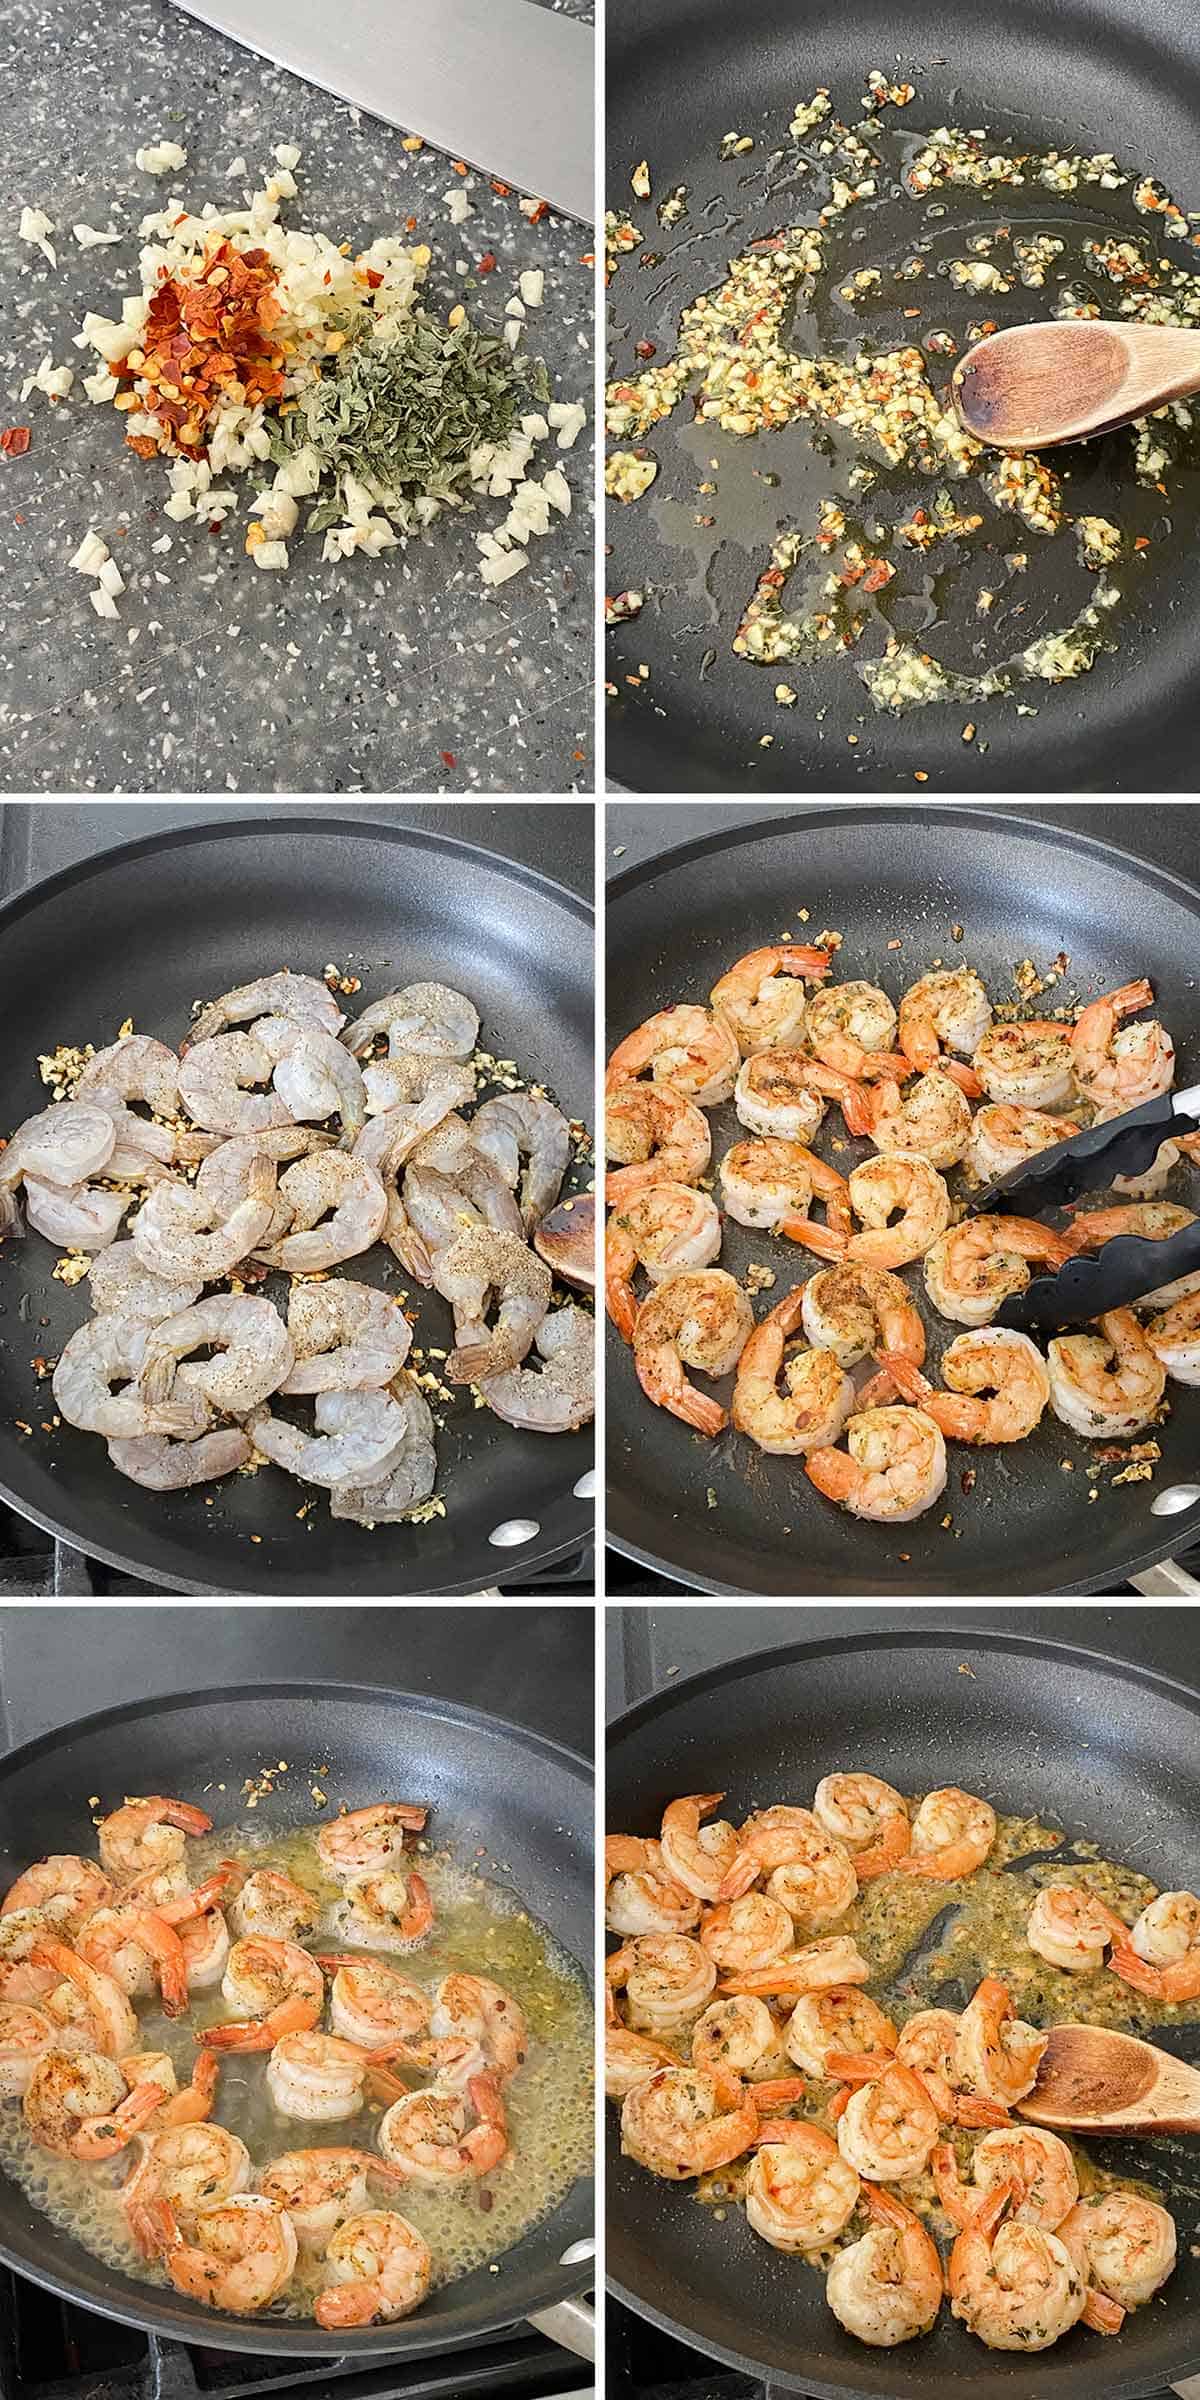 Process collage showing how to saute shrimp in chopped garlic, herbs, and spicy crushed red pepper and deglaze with wine and lemon juice to make a thick sauce.